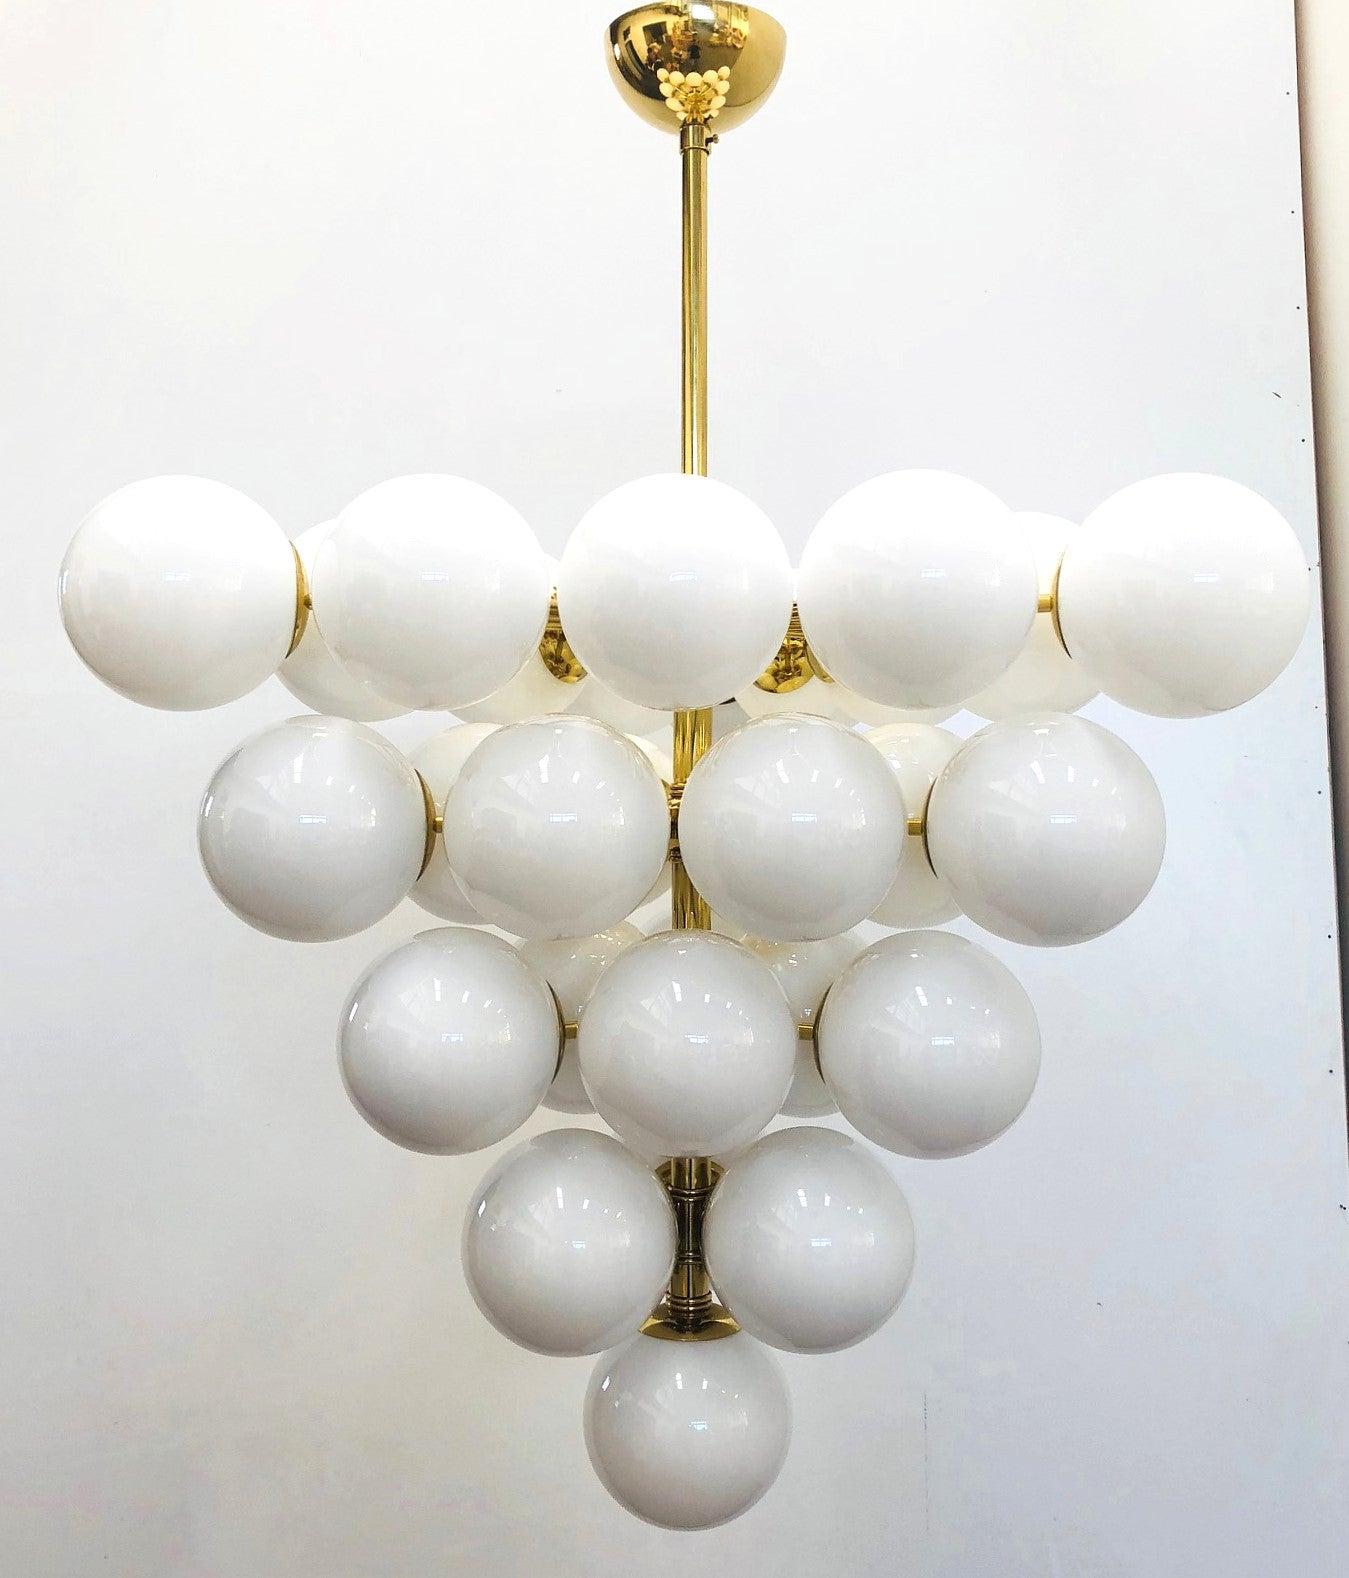 Italian chandelier with white Murano glass globes mounted on polished brass frame / Designed by Fabio Bergomi for Fabio Ltd / Made in Italy
31 lights / E12 or E14 type / max 40W each
Measures: Diameter 31.5 inches / Height 31.5 inches not including